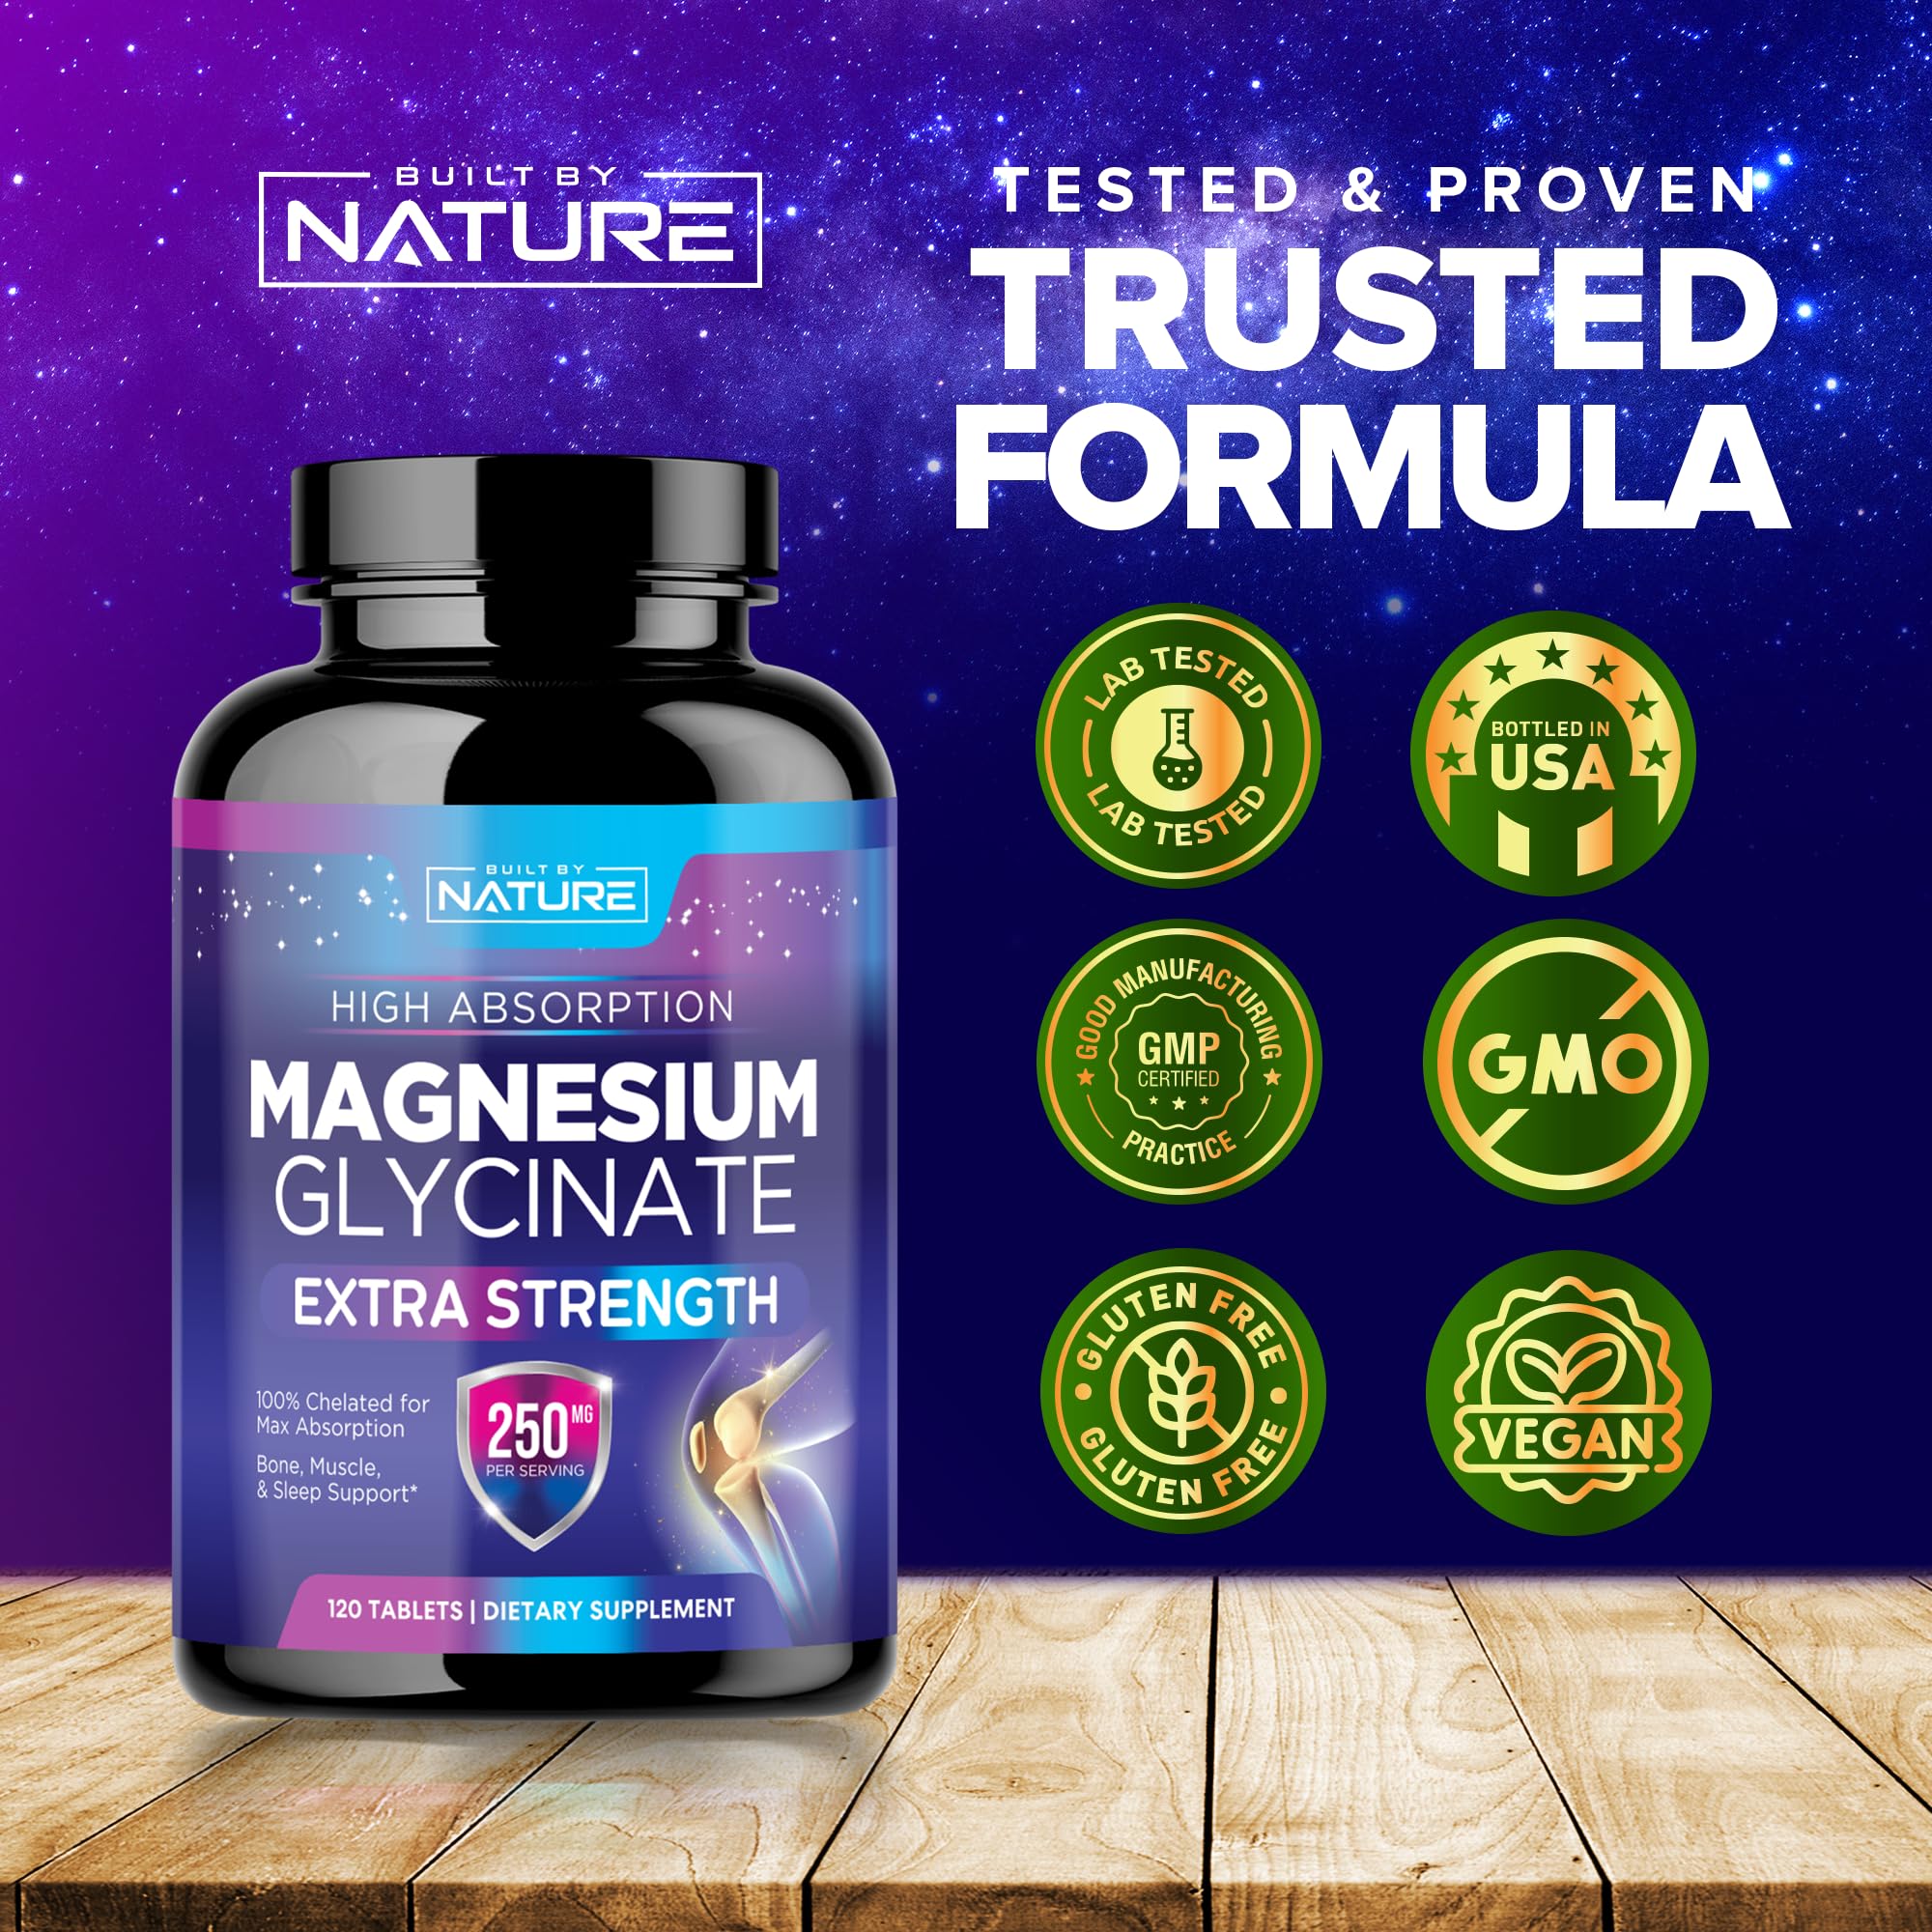 Magnesium Glycinate 250mg - High Absorption Chelated Magnesium Supplement - 100% Pure Magnesium Glycinate - Stress, Sleep, Heart, and Muscle Health Support - Non-GMO, Vegan, Gluten-Free